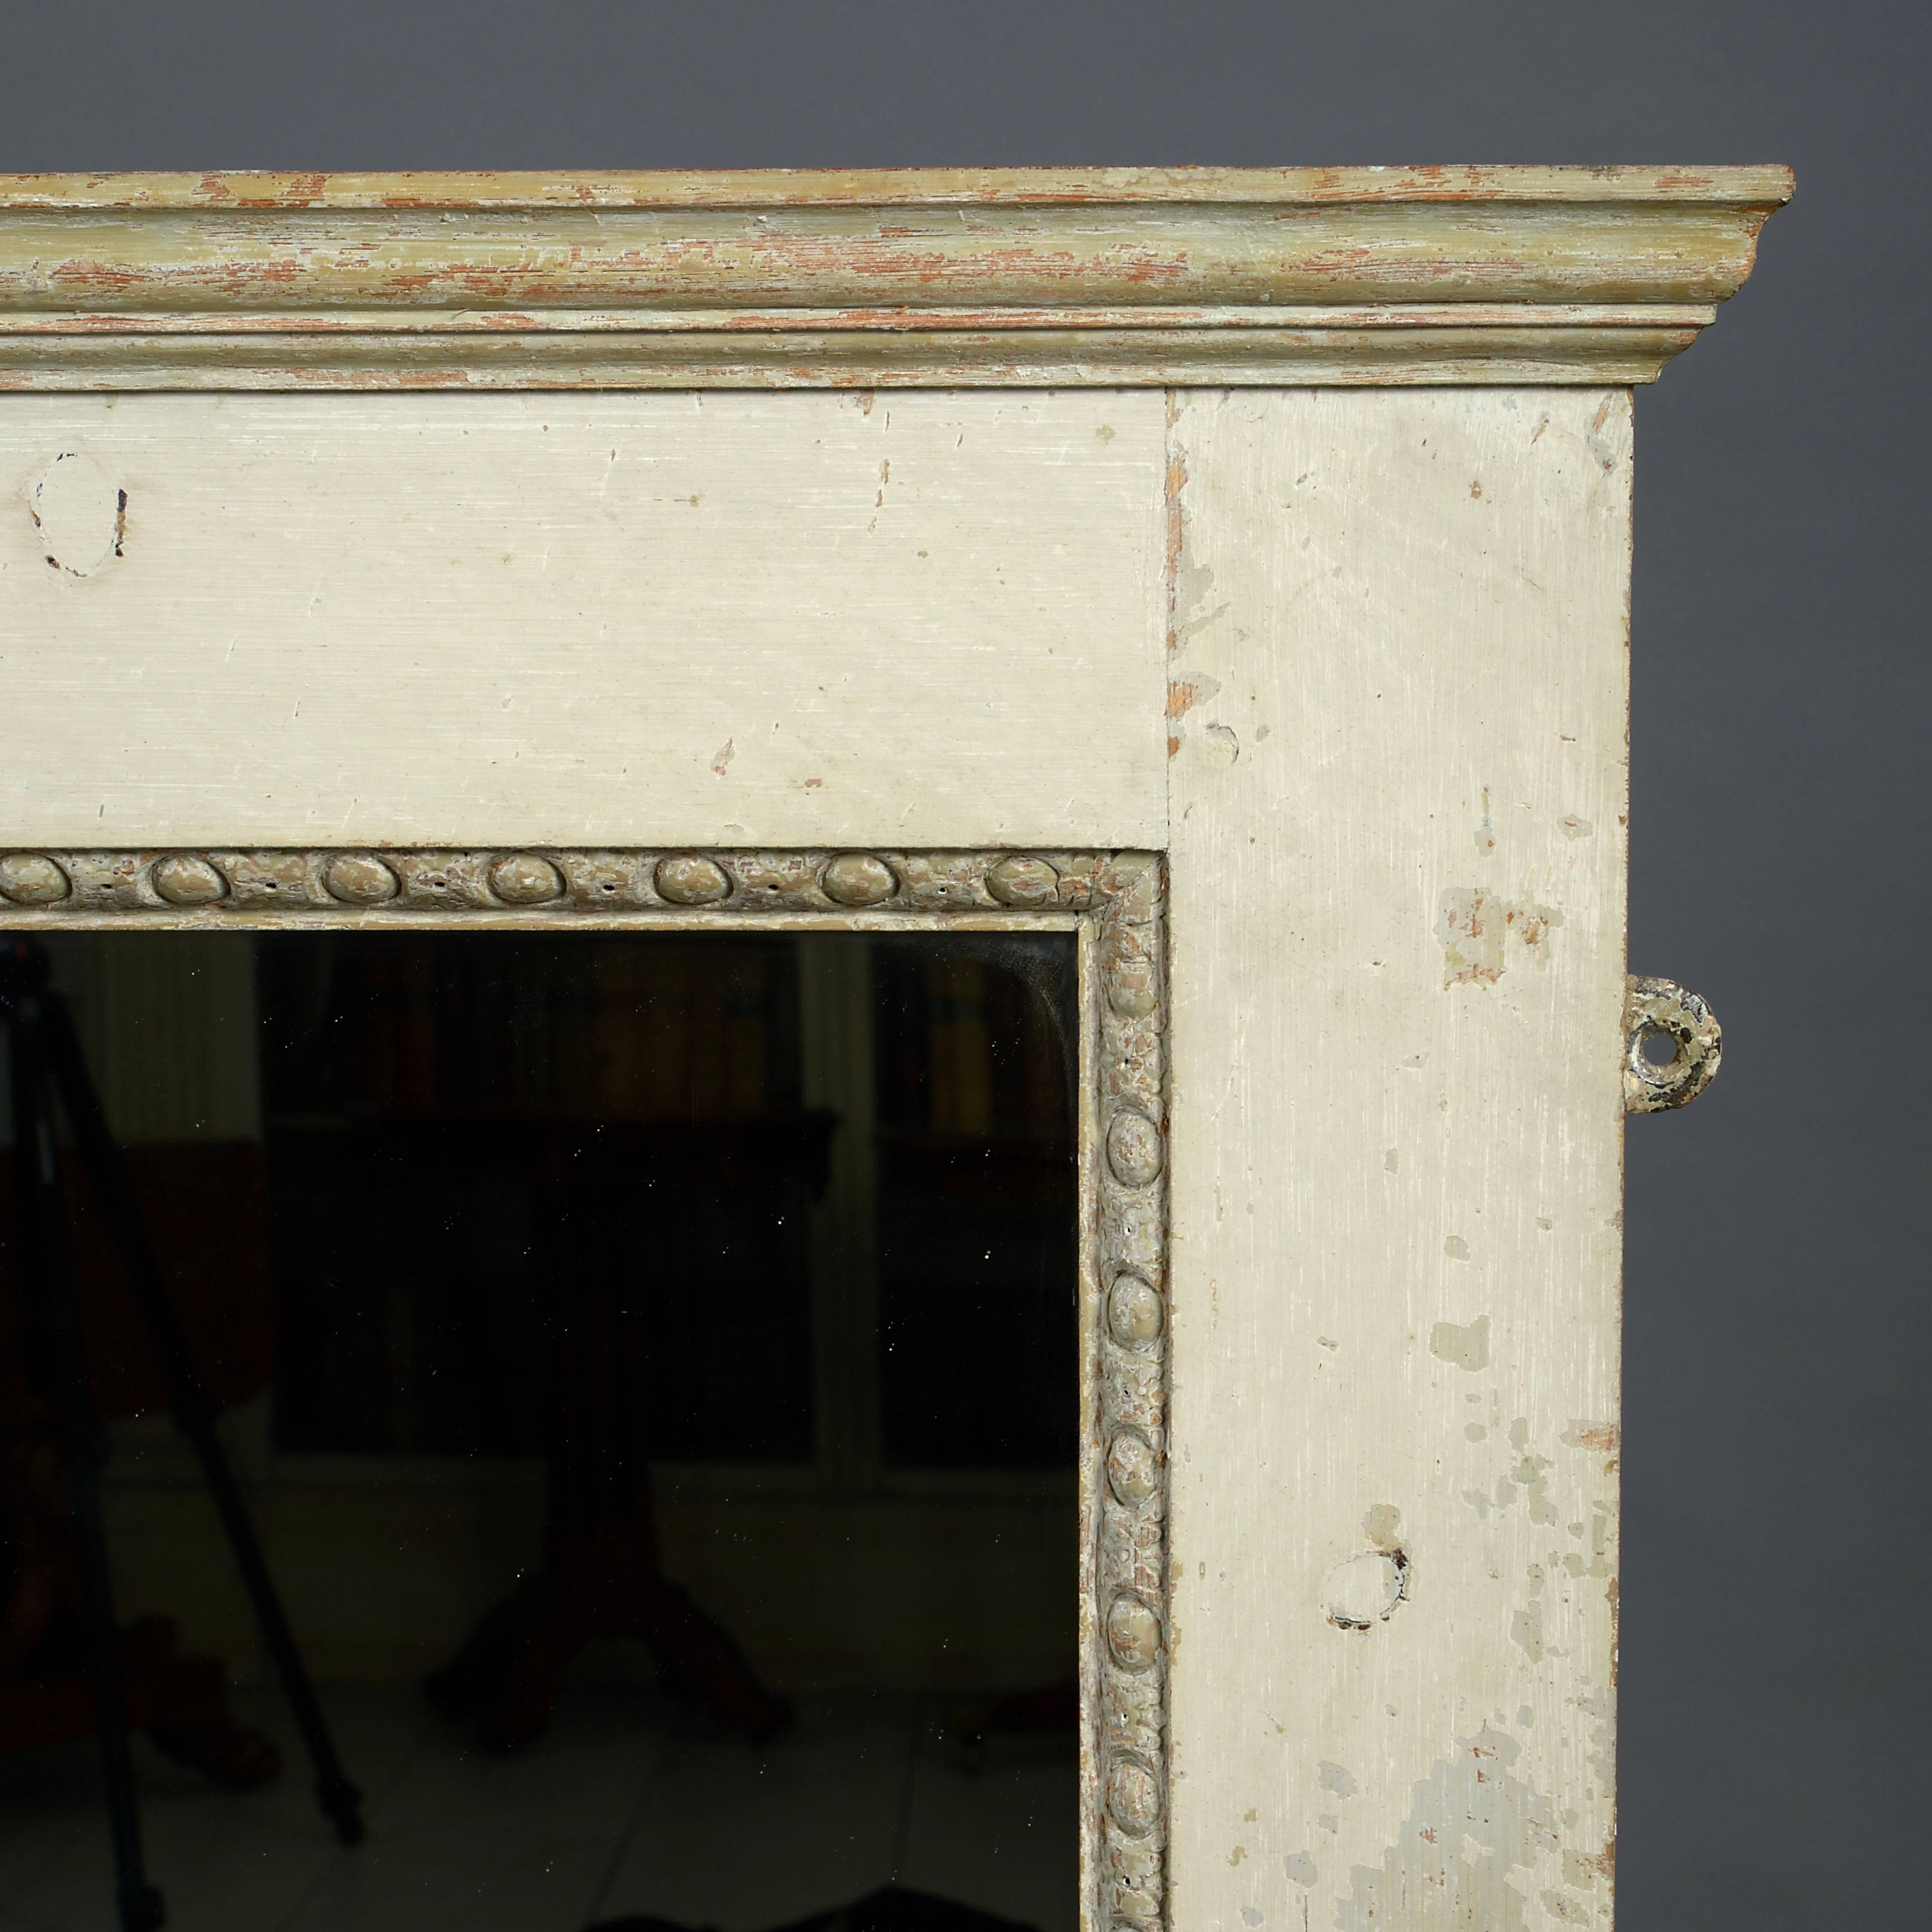 A George II stone-painted overmantel mirror, with egg and dart carved moulding, circa 1740.

Provenance
Wentworth Woodhouse, Yorkshire.